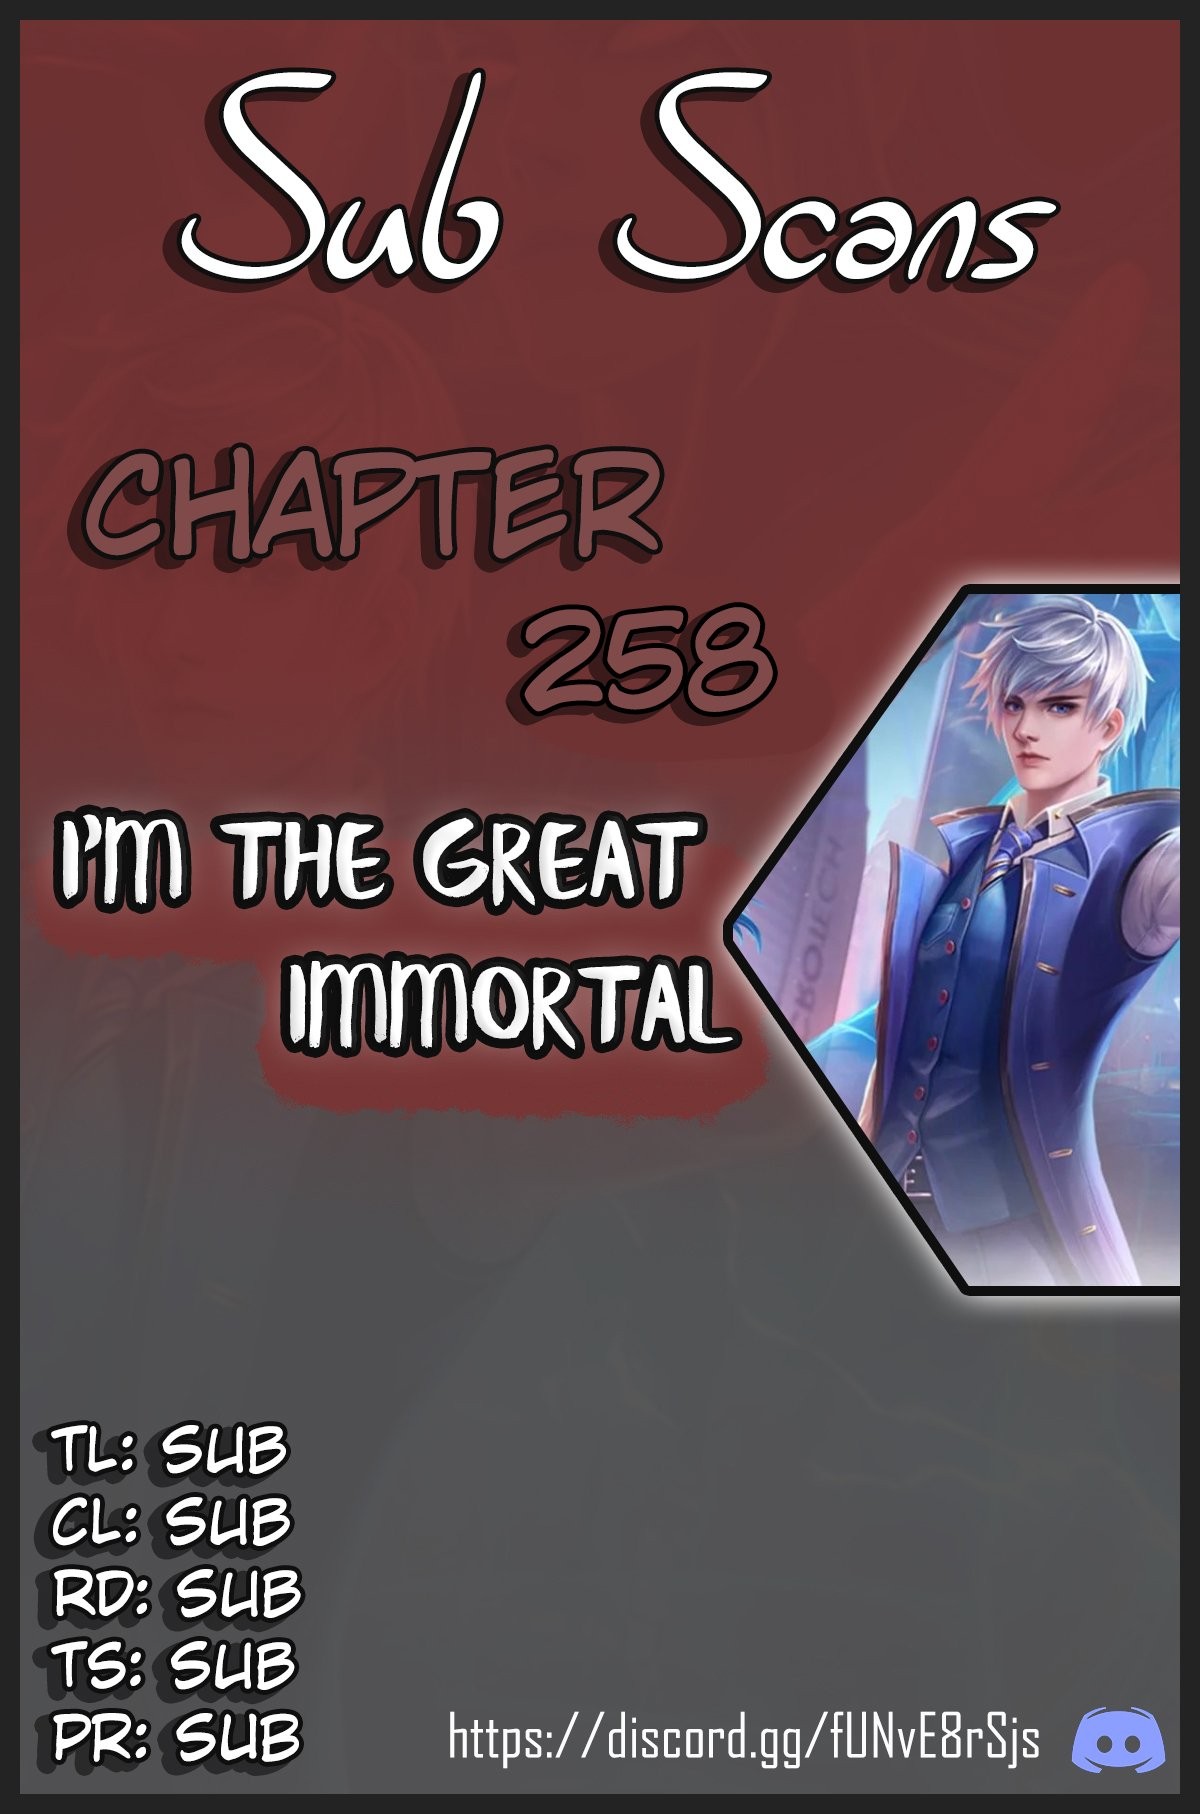 I'm the Great Immortal Chapter 258 - 1